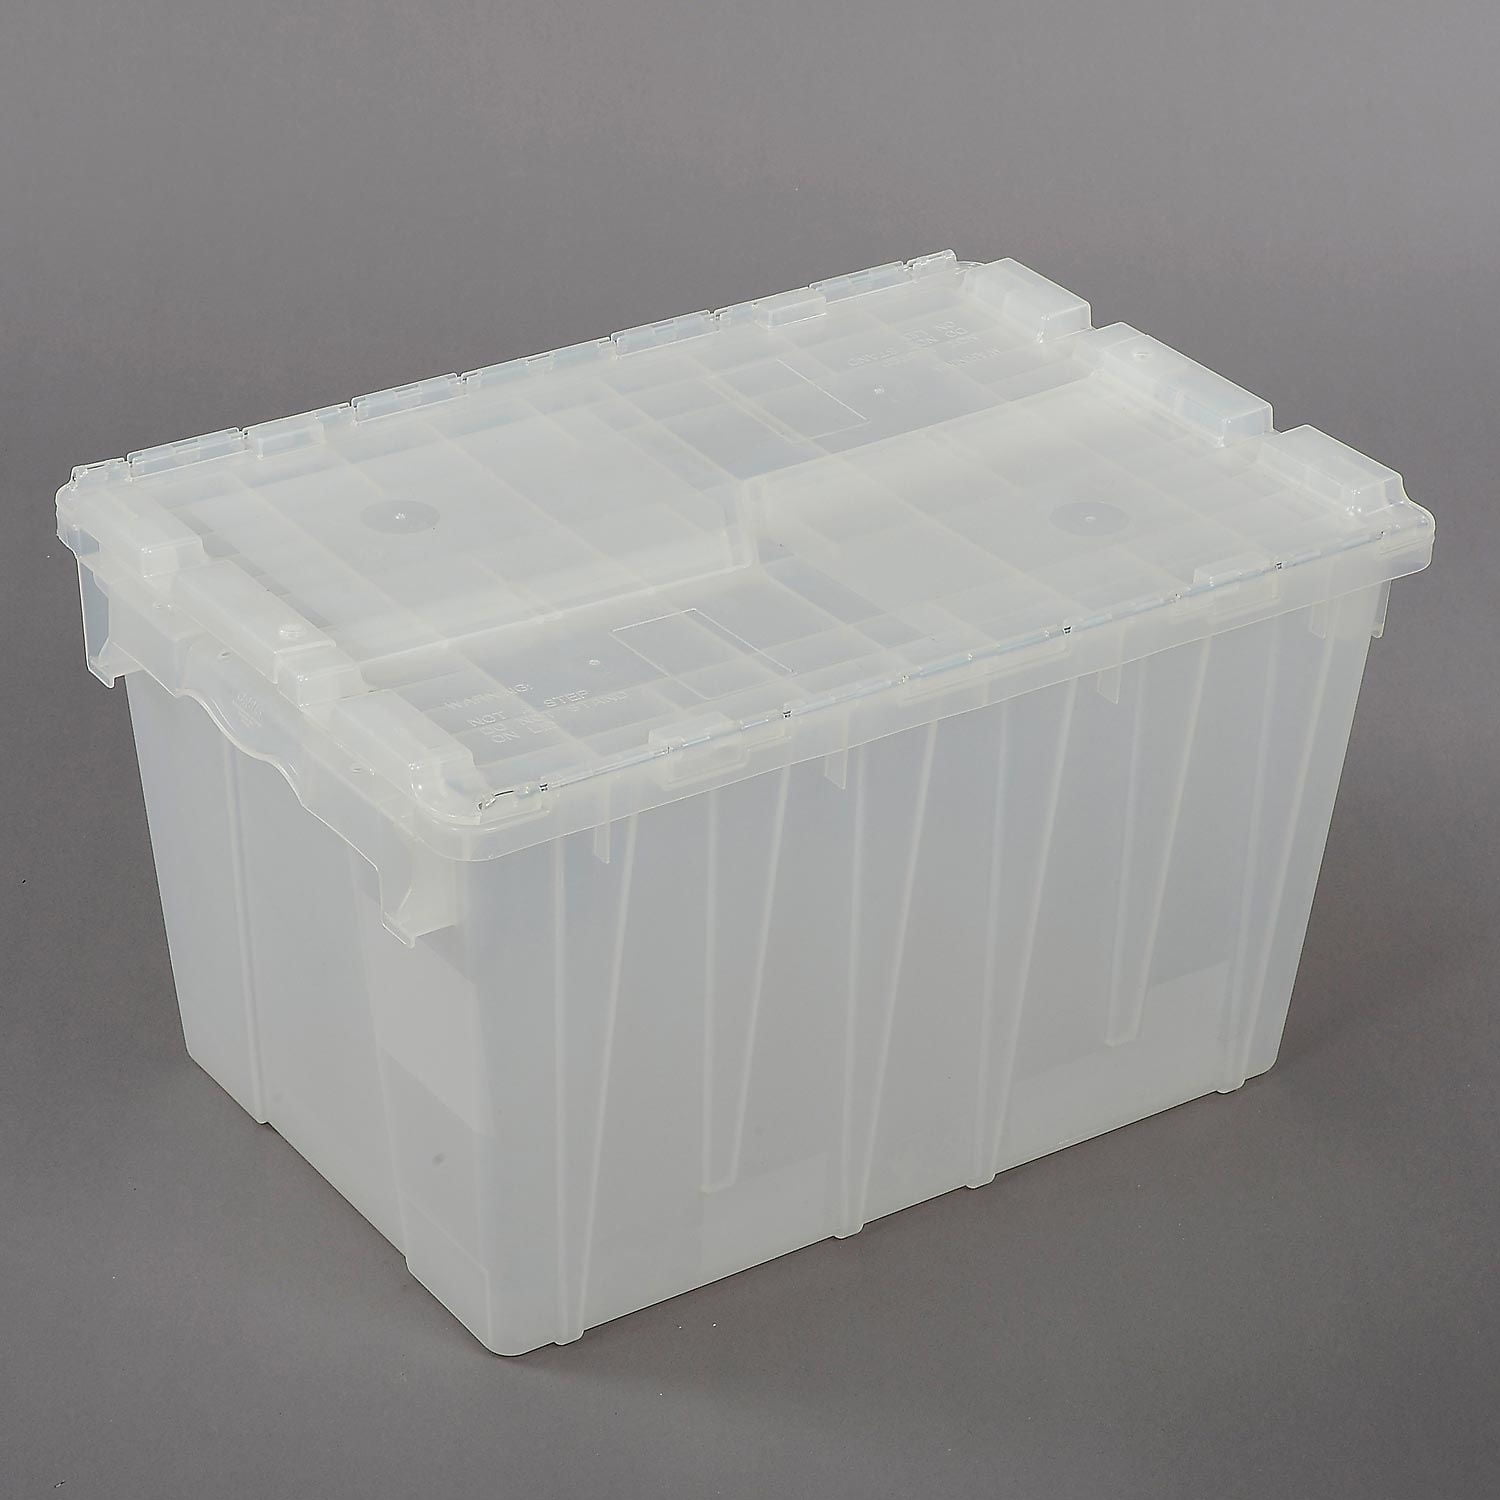 MR. LID 10 PACK of CONTAINERS – Mr. Lid